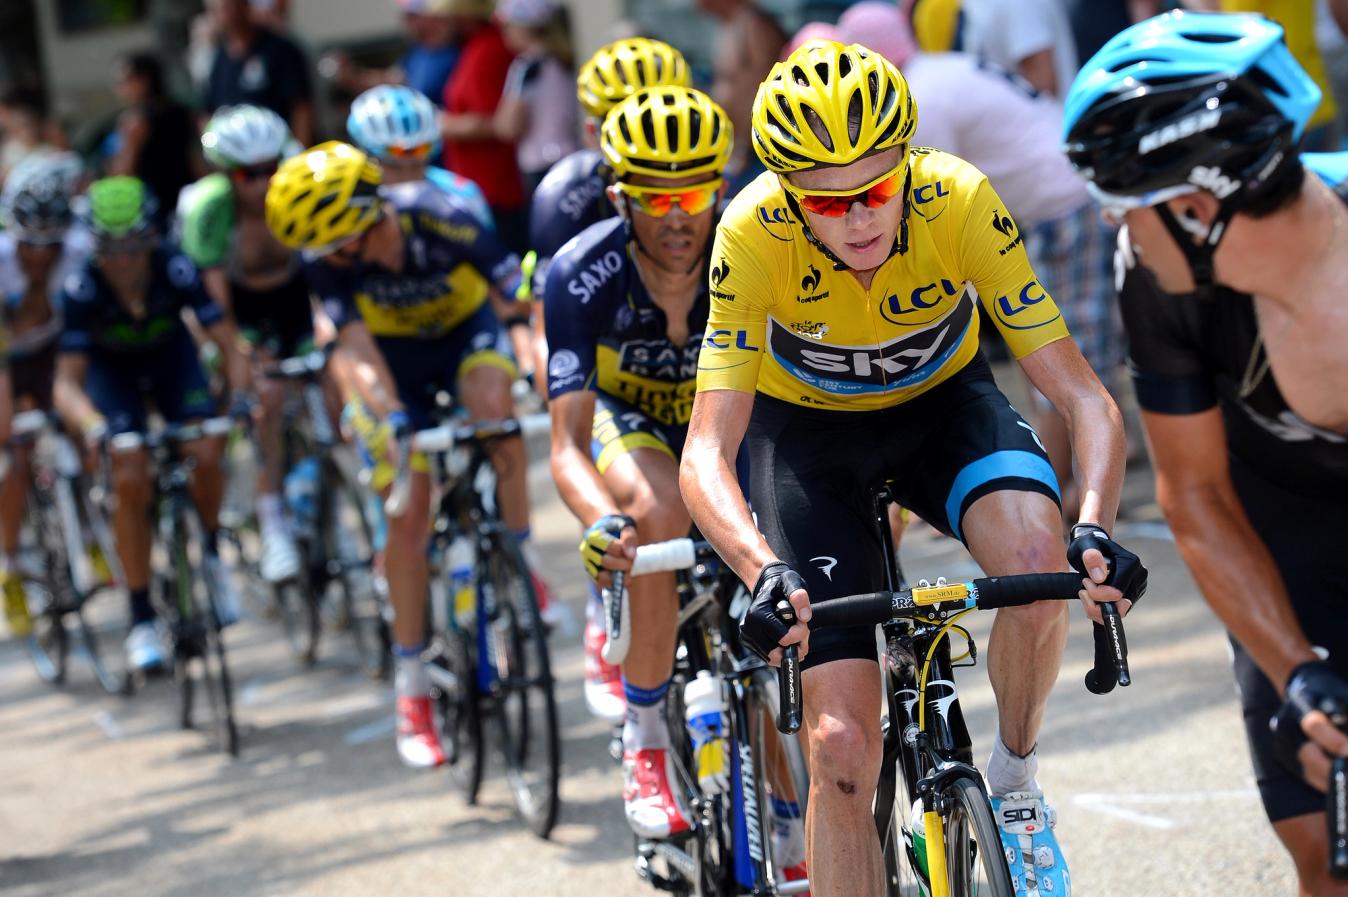 Chris Froome was well known for riding at higher cadences rather than grinding up climbs.